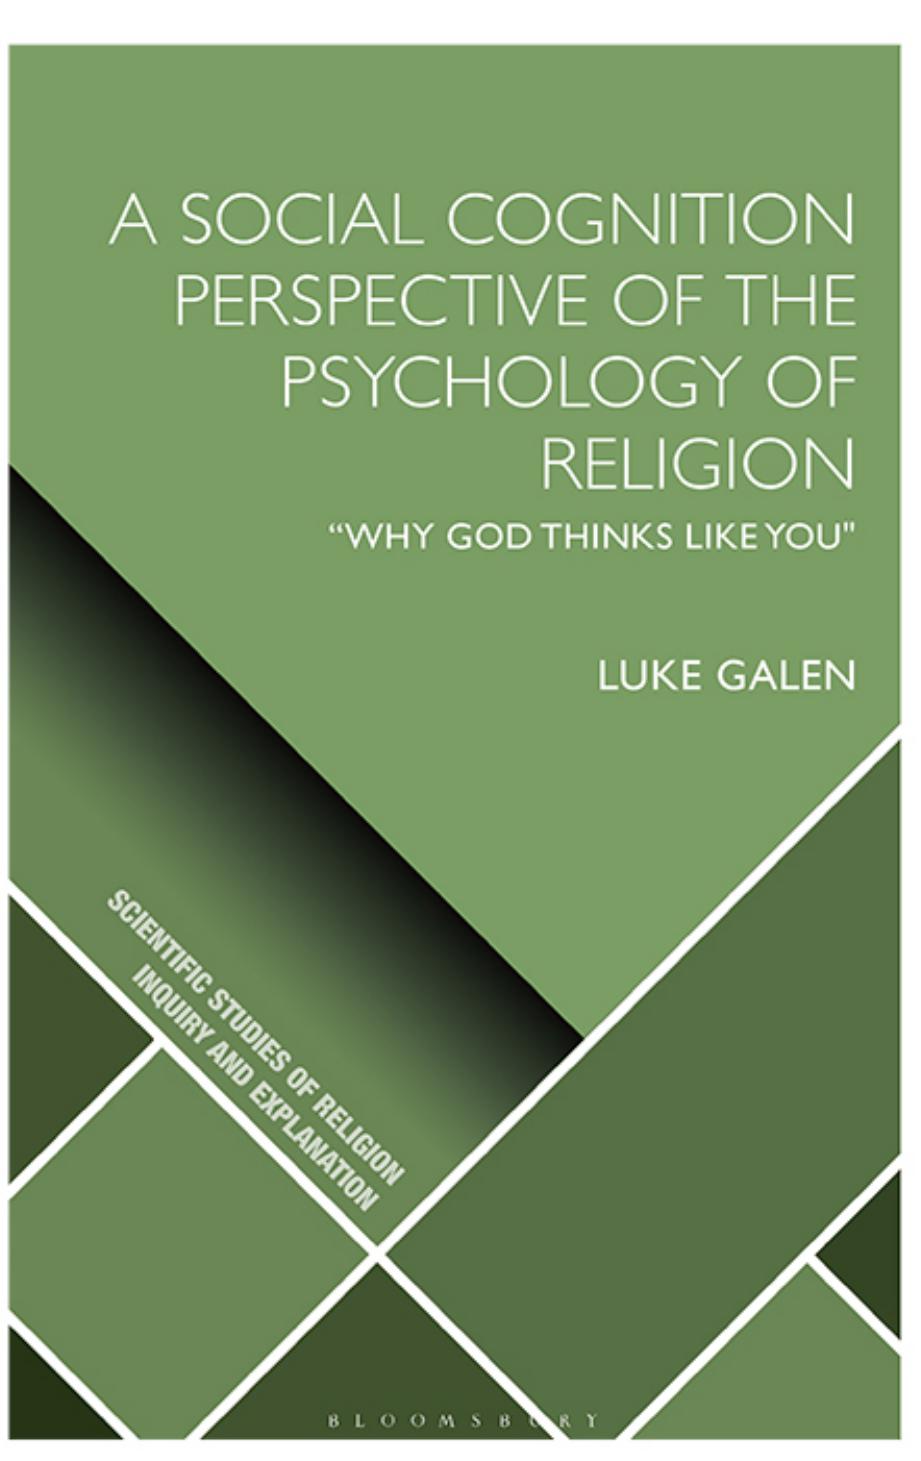 A Social Cognition Perspective of the Psychology of Religion: âWhy God Thinks Like You" by Luke Galen